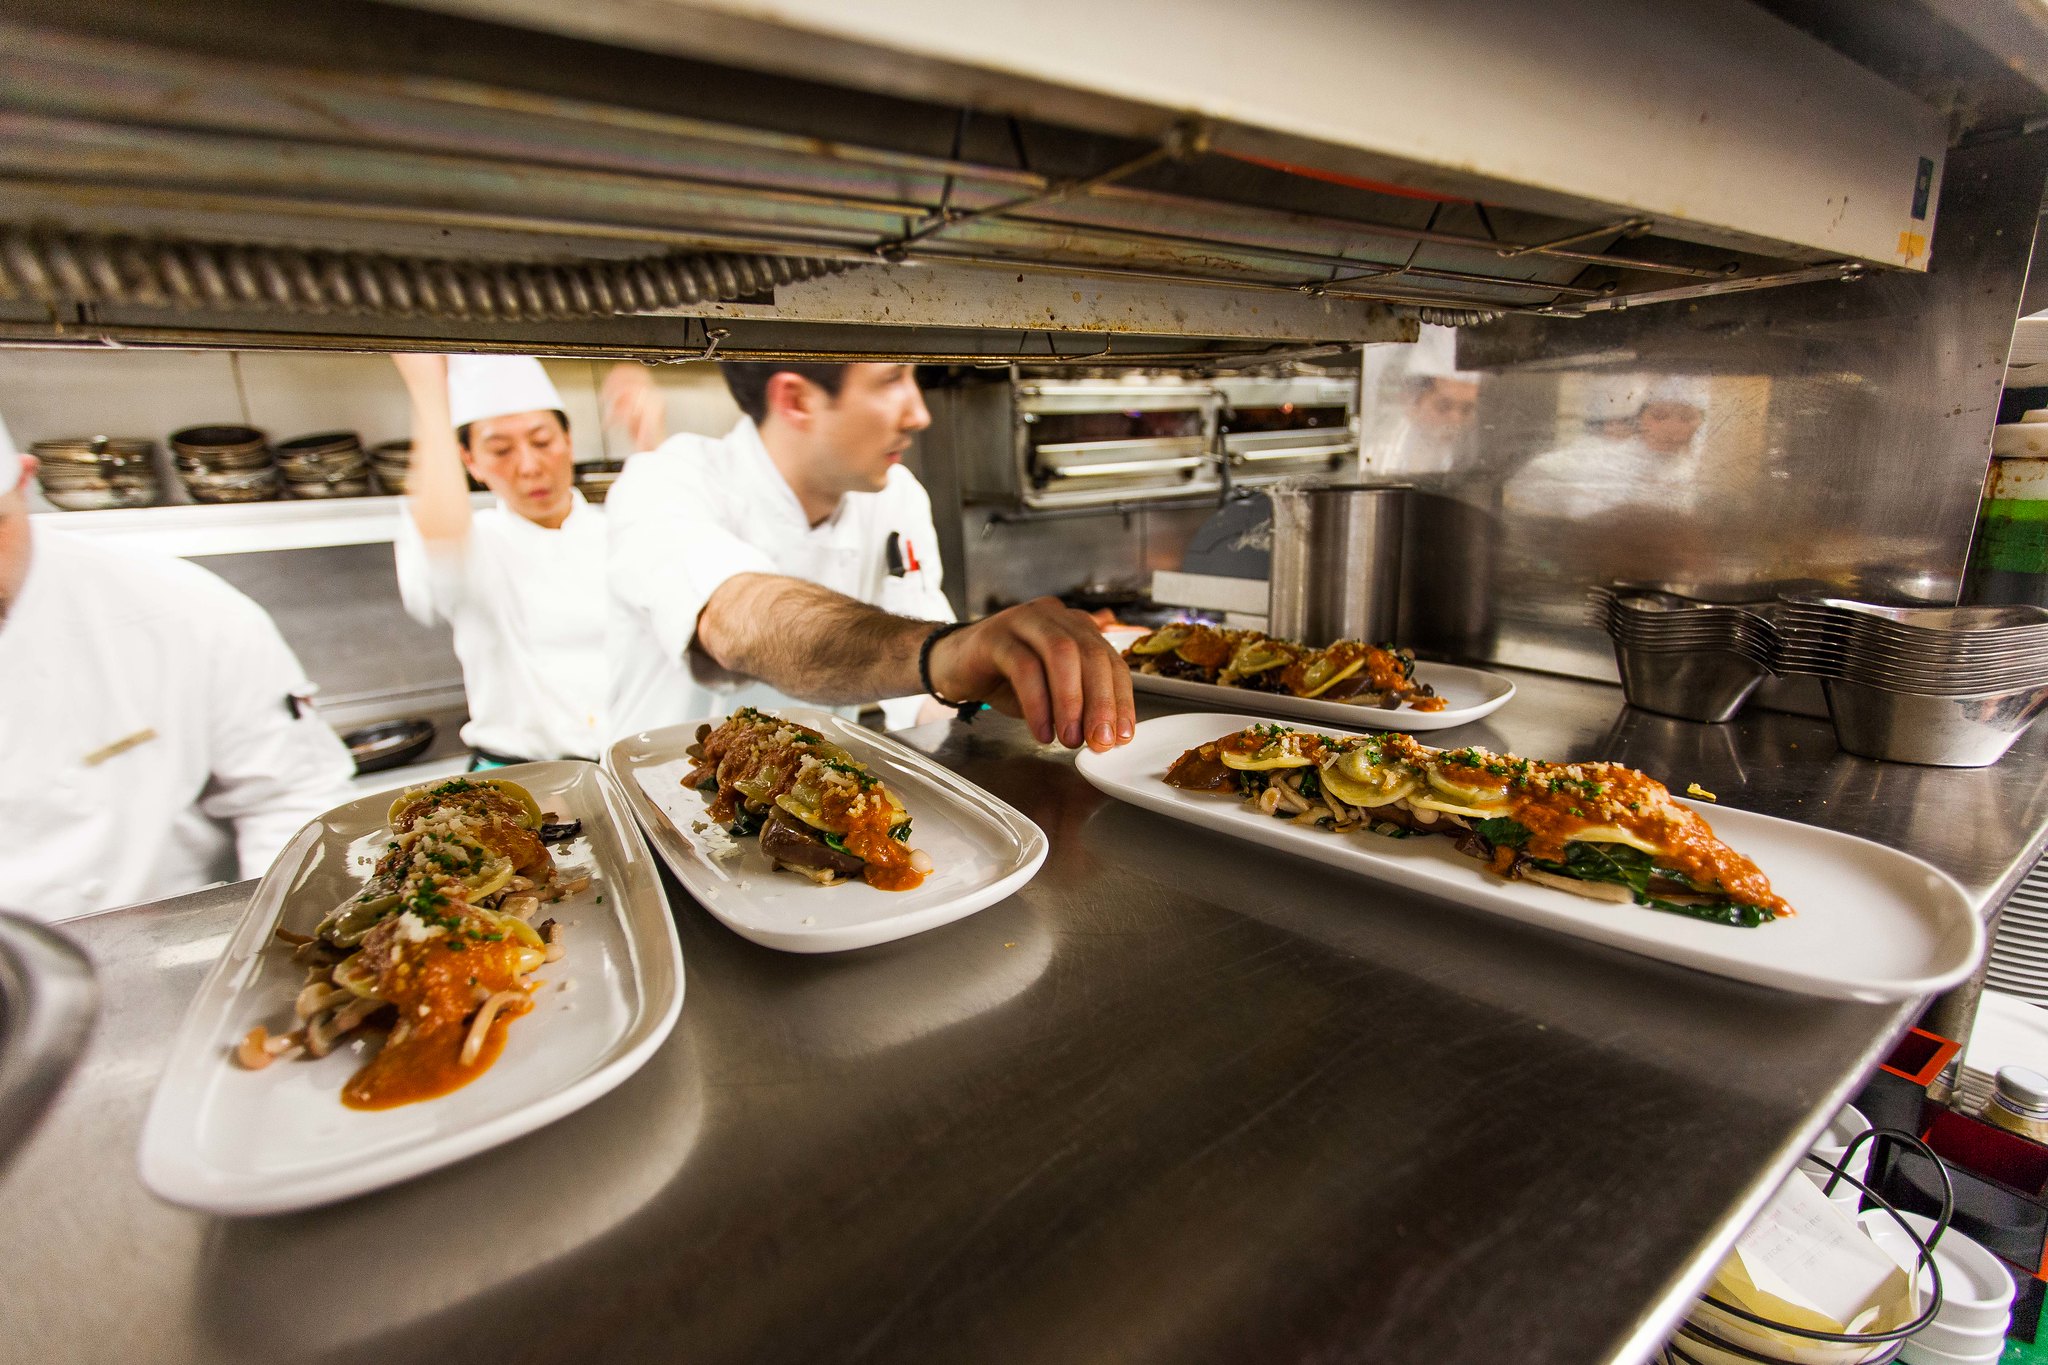 A chef sets plates of gourmet food onto the passthrough in a busy kitchen.